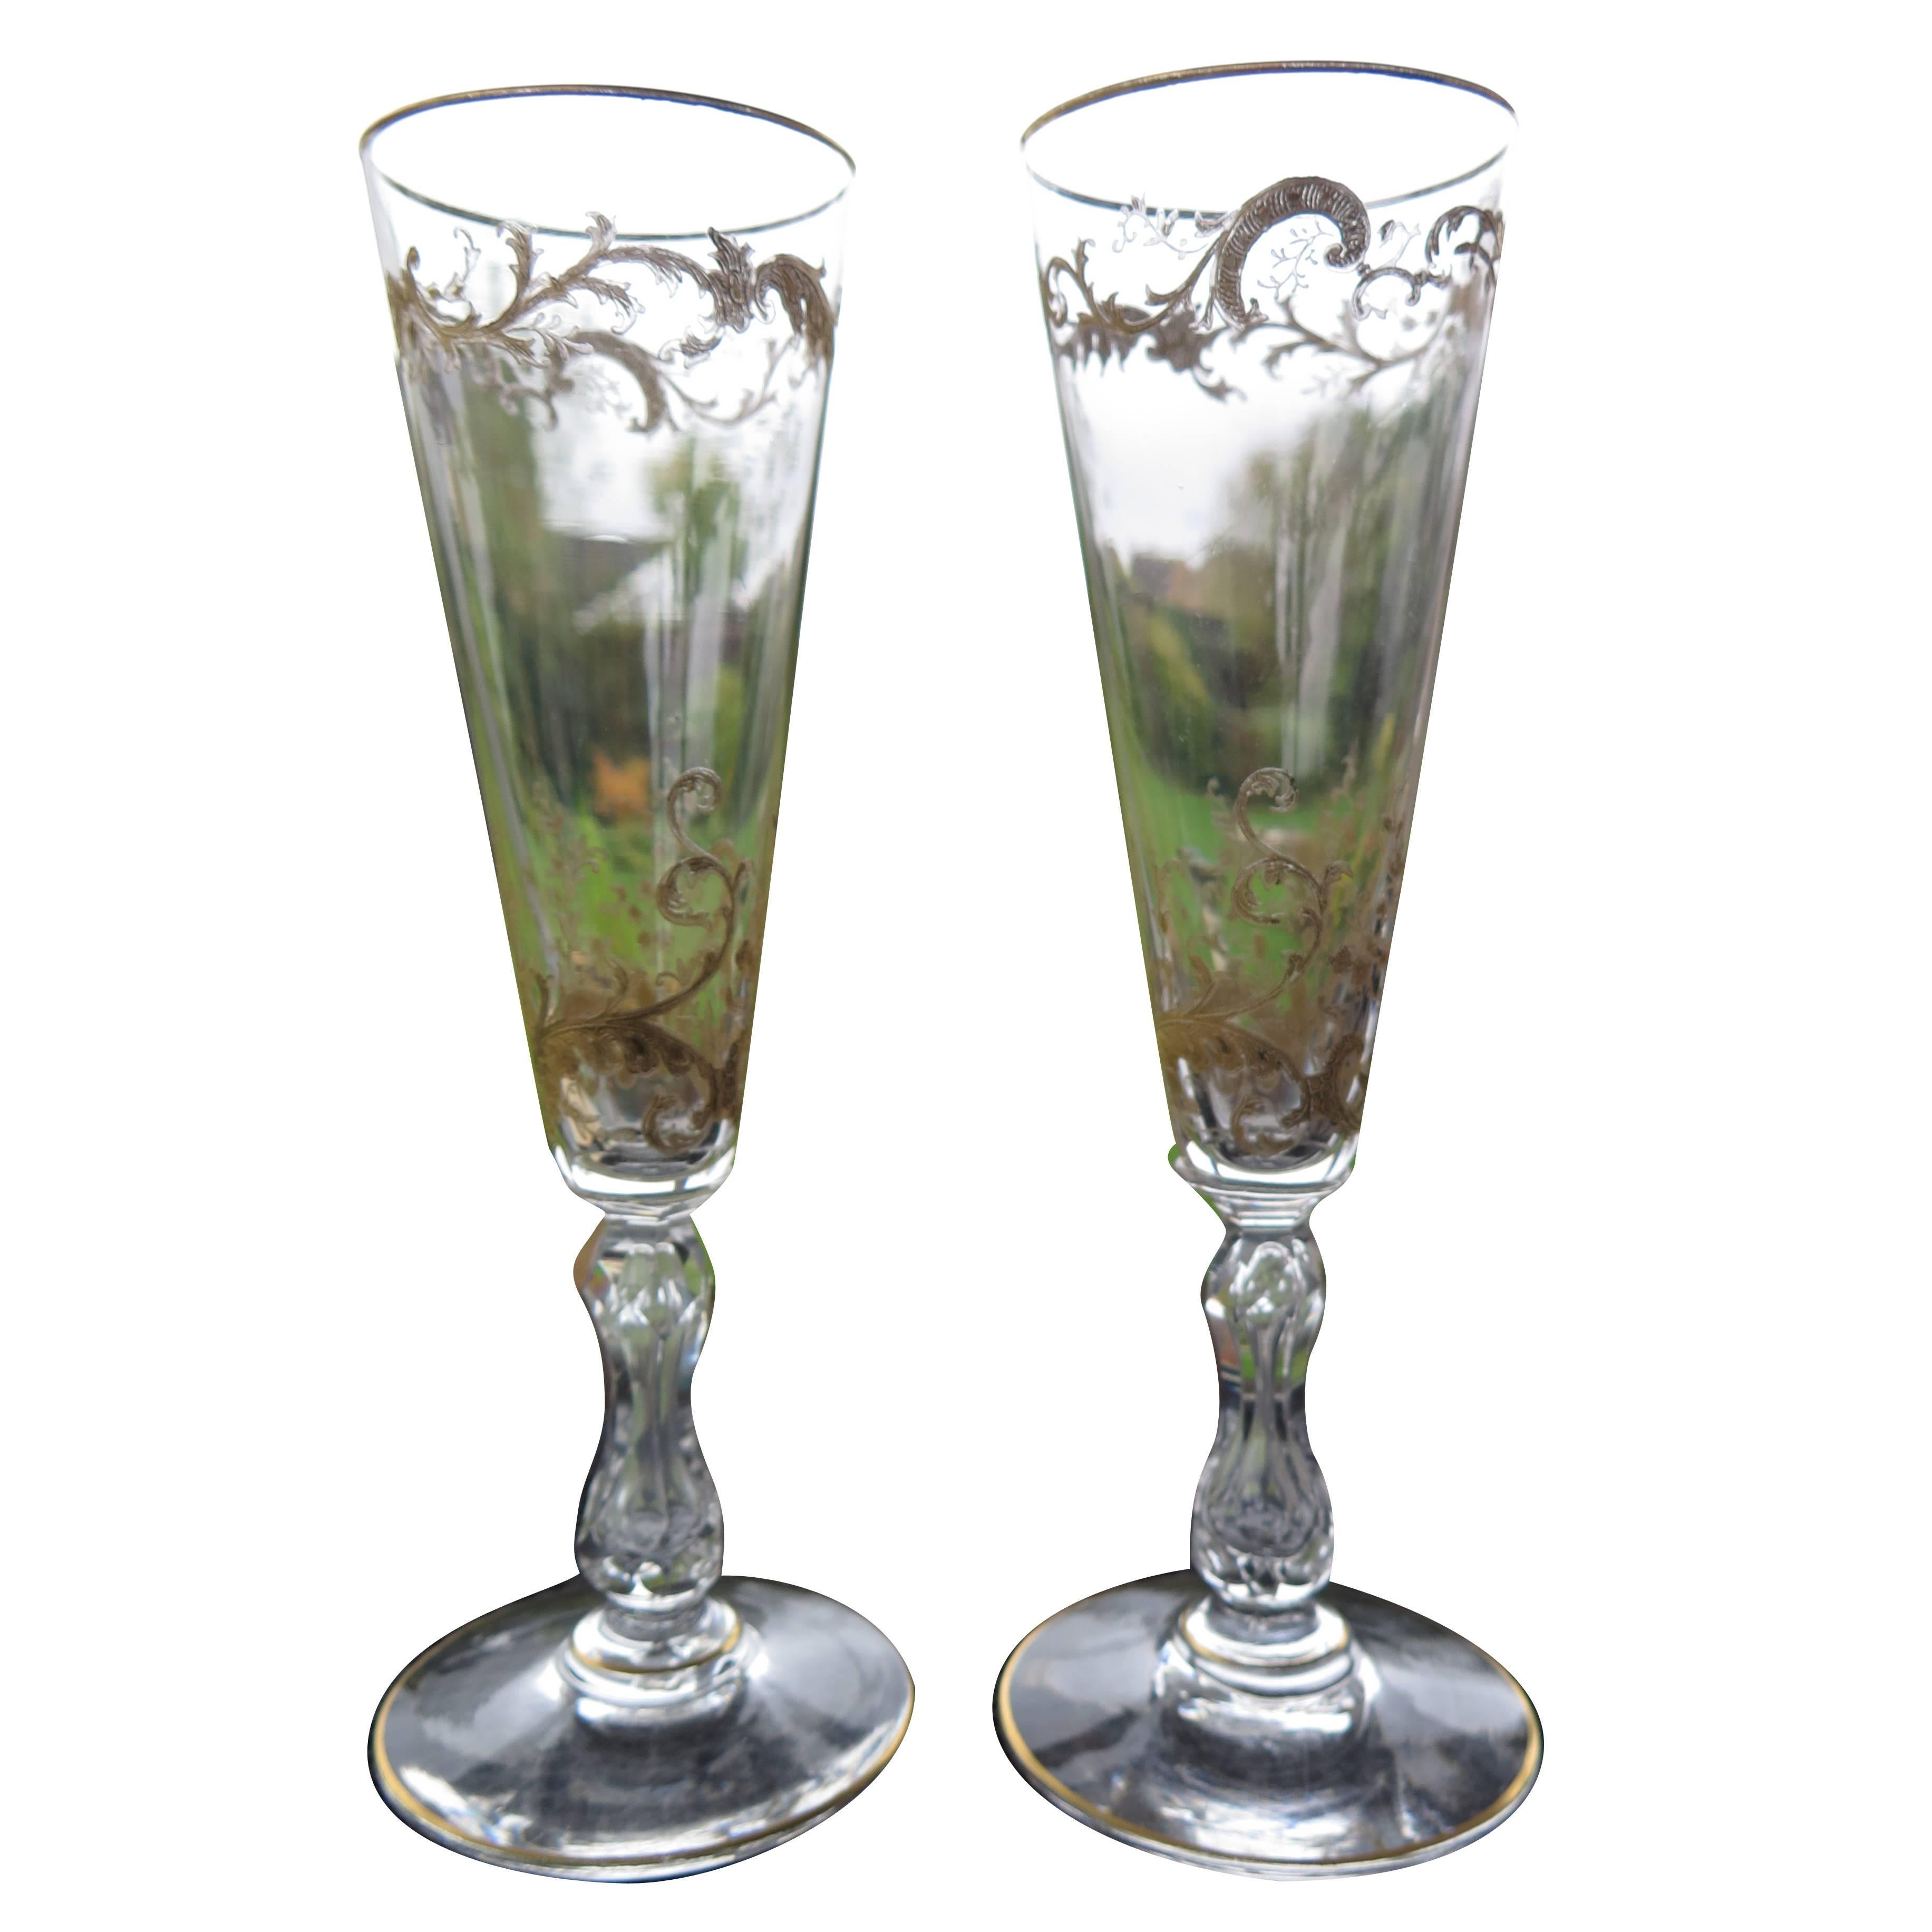 This is a very fine pair of crystal champagne flutes from the late 19th century.

Gilded drinking glasses of this quality and detail are rare and these pair would probably have been made as cabinet glasses.

They are made from handblown lead